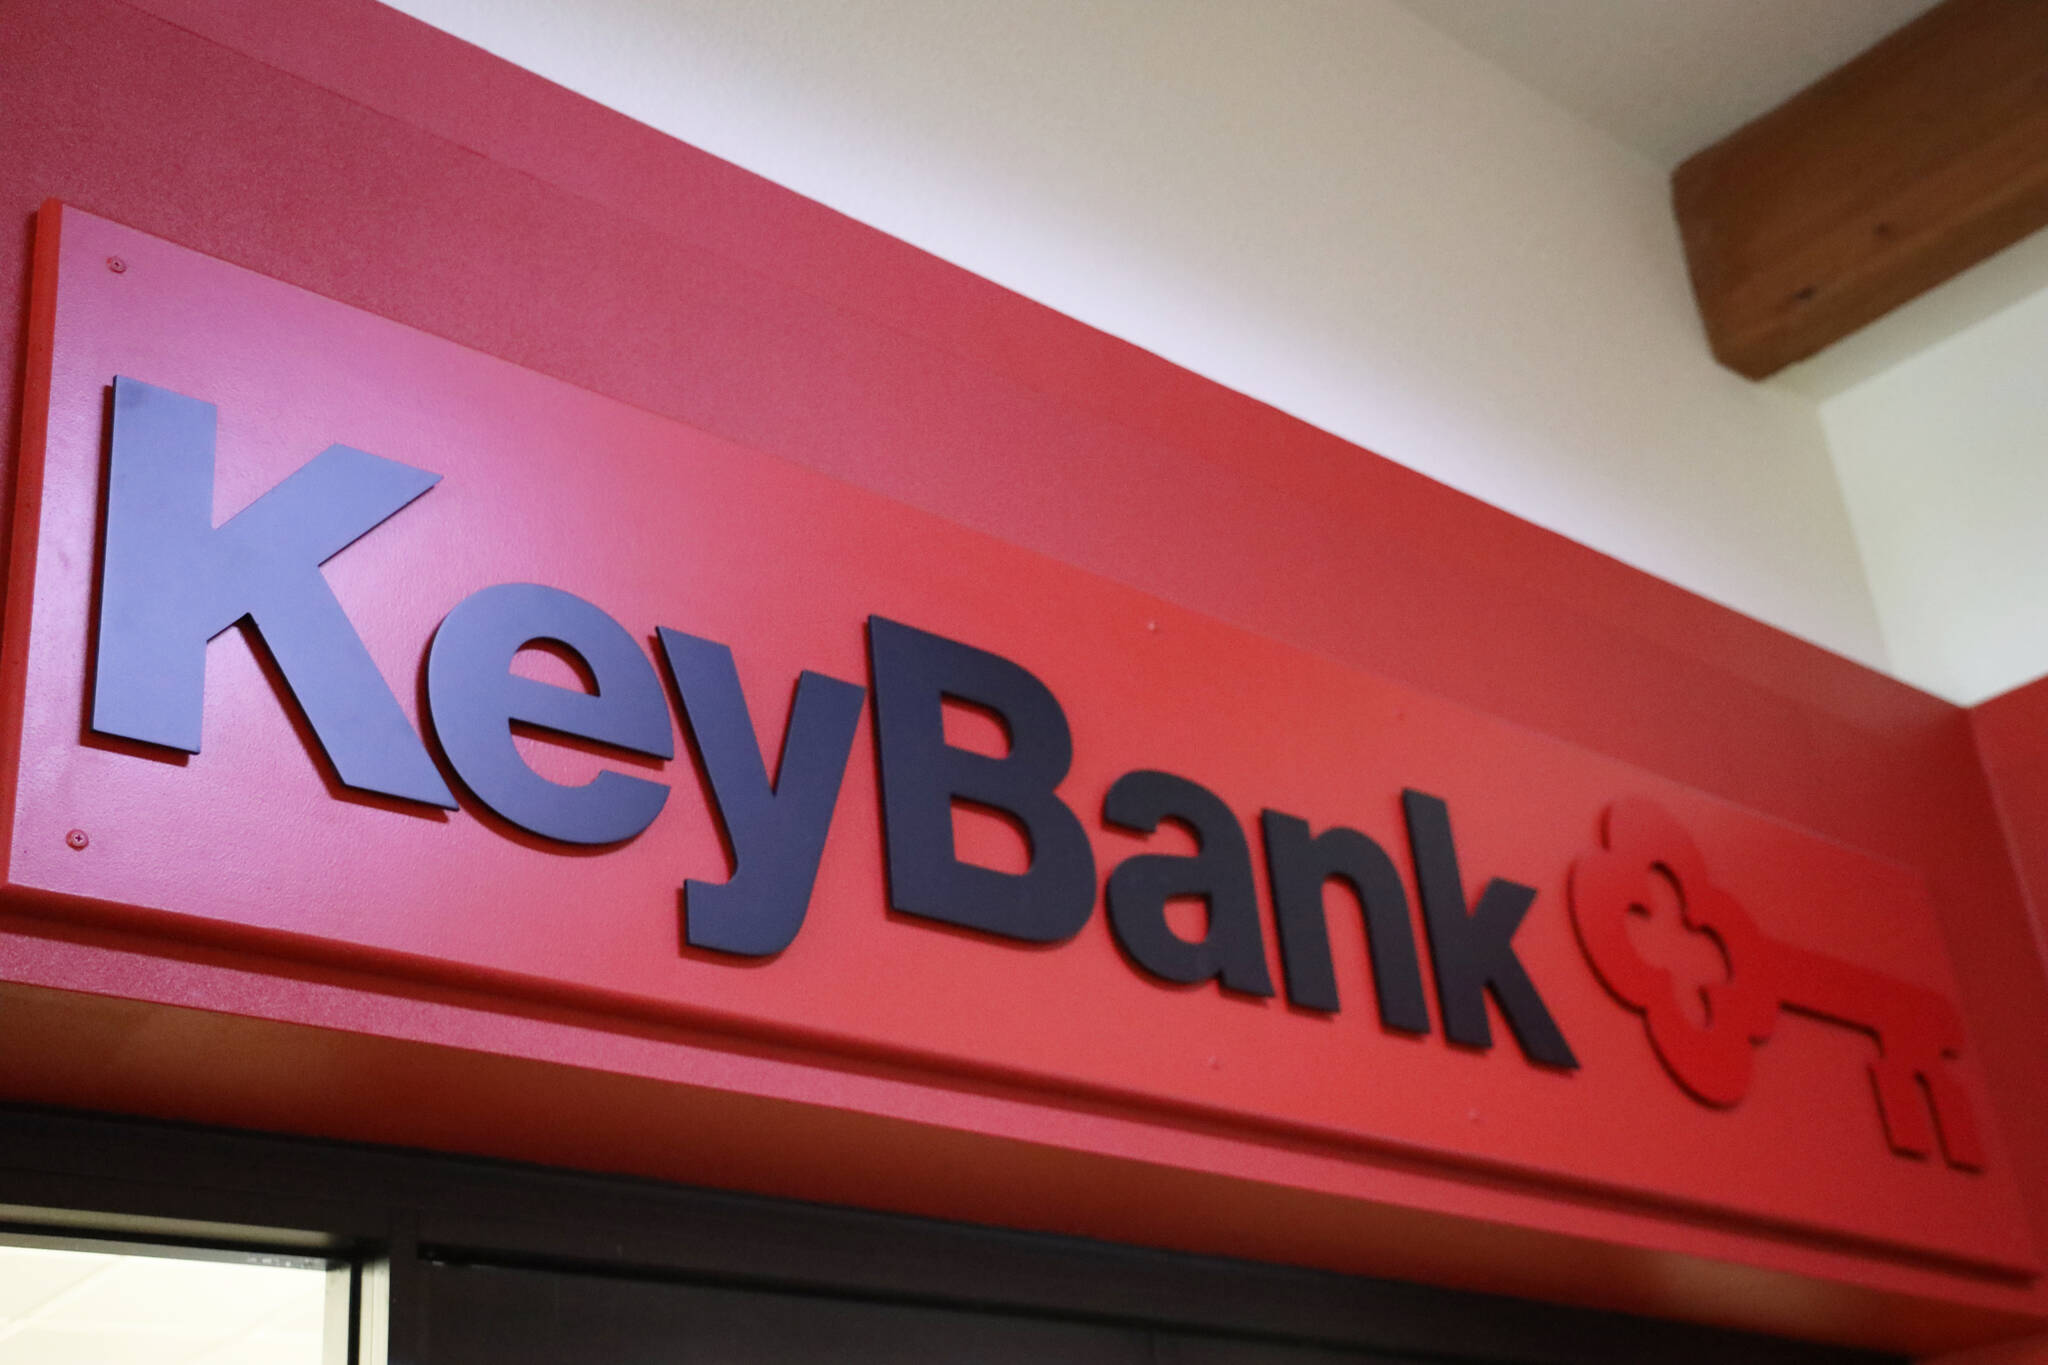 Key Bank was one of the banks victimized by a Juneau man who pleaded guilty Thursday to federal theft charges after stealing nearly $580,000 from multiple banks and credit unions between 2019 and 2022. (Clarise Larson / Juneau Empire File)